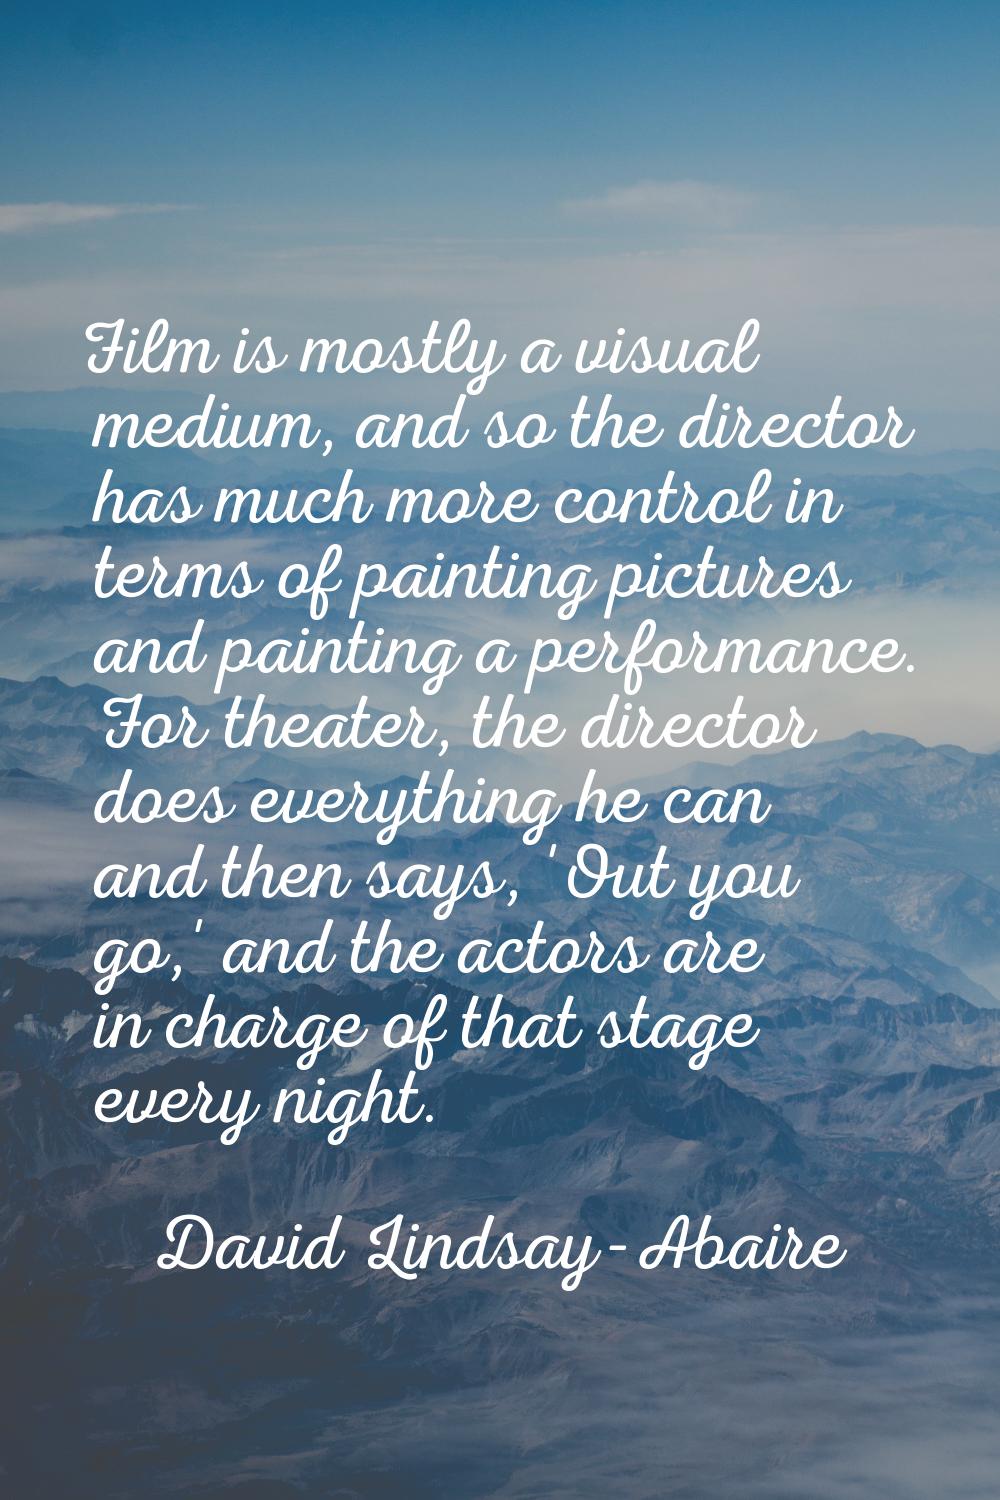 Film is mostly a visual medium, and so the director has much more control in terms of painting pict